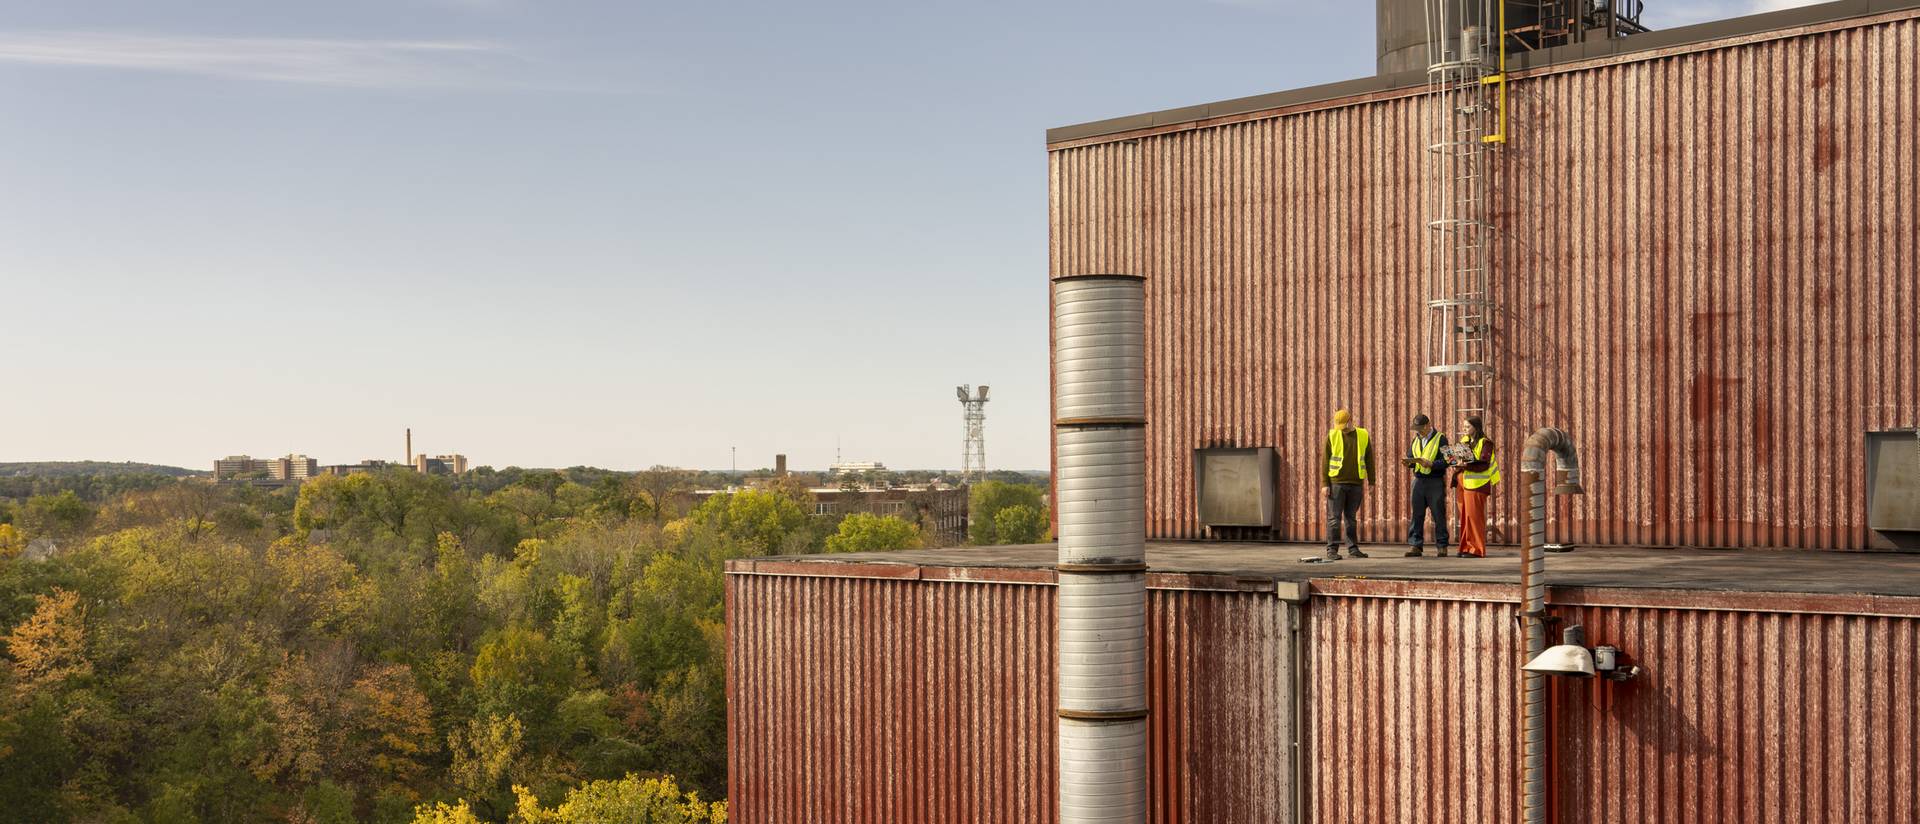 Three people wearing high-visibility vests stand on a large building's roof and collect noise measurement research data